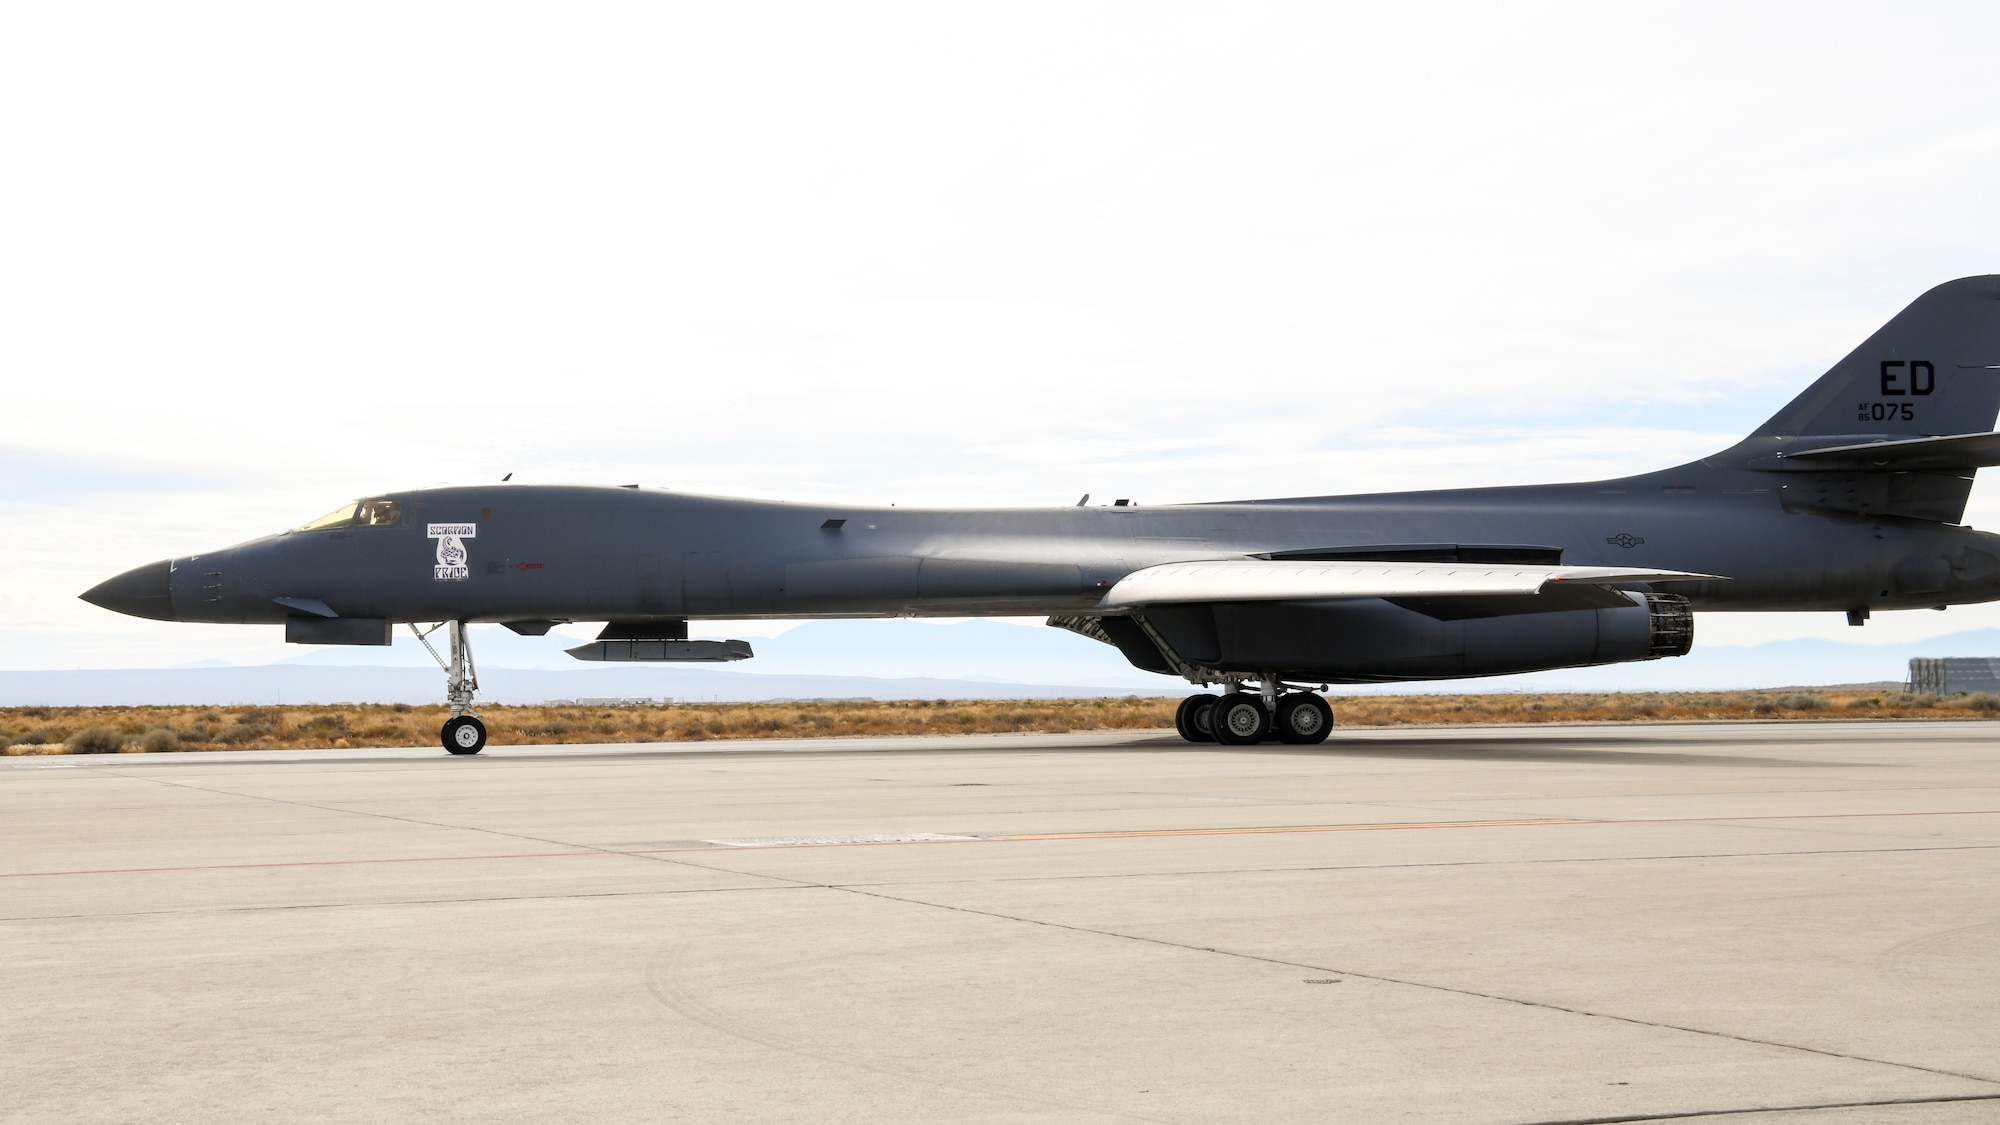 A B-1B Lancer taxis at Edwards Air Force Base, California, Nov. 20. The aircraft conducted a captive carry flight to demonstrate its external weapons capabilities with a Joint Air-to-Surface Standoff Missile (JASSM) in the skies over Edwards. (Air Force photo by 2nd Lt. Christine Saunders)